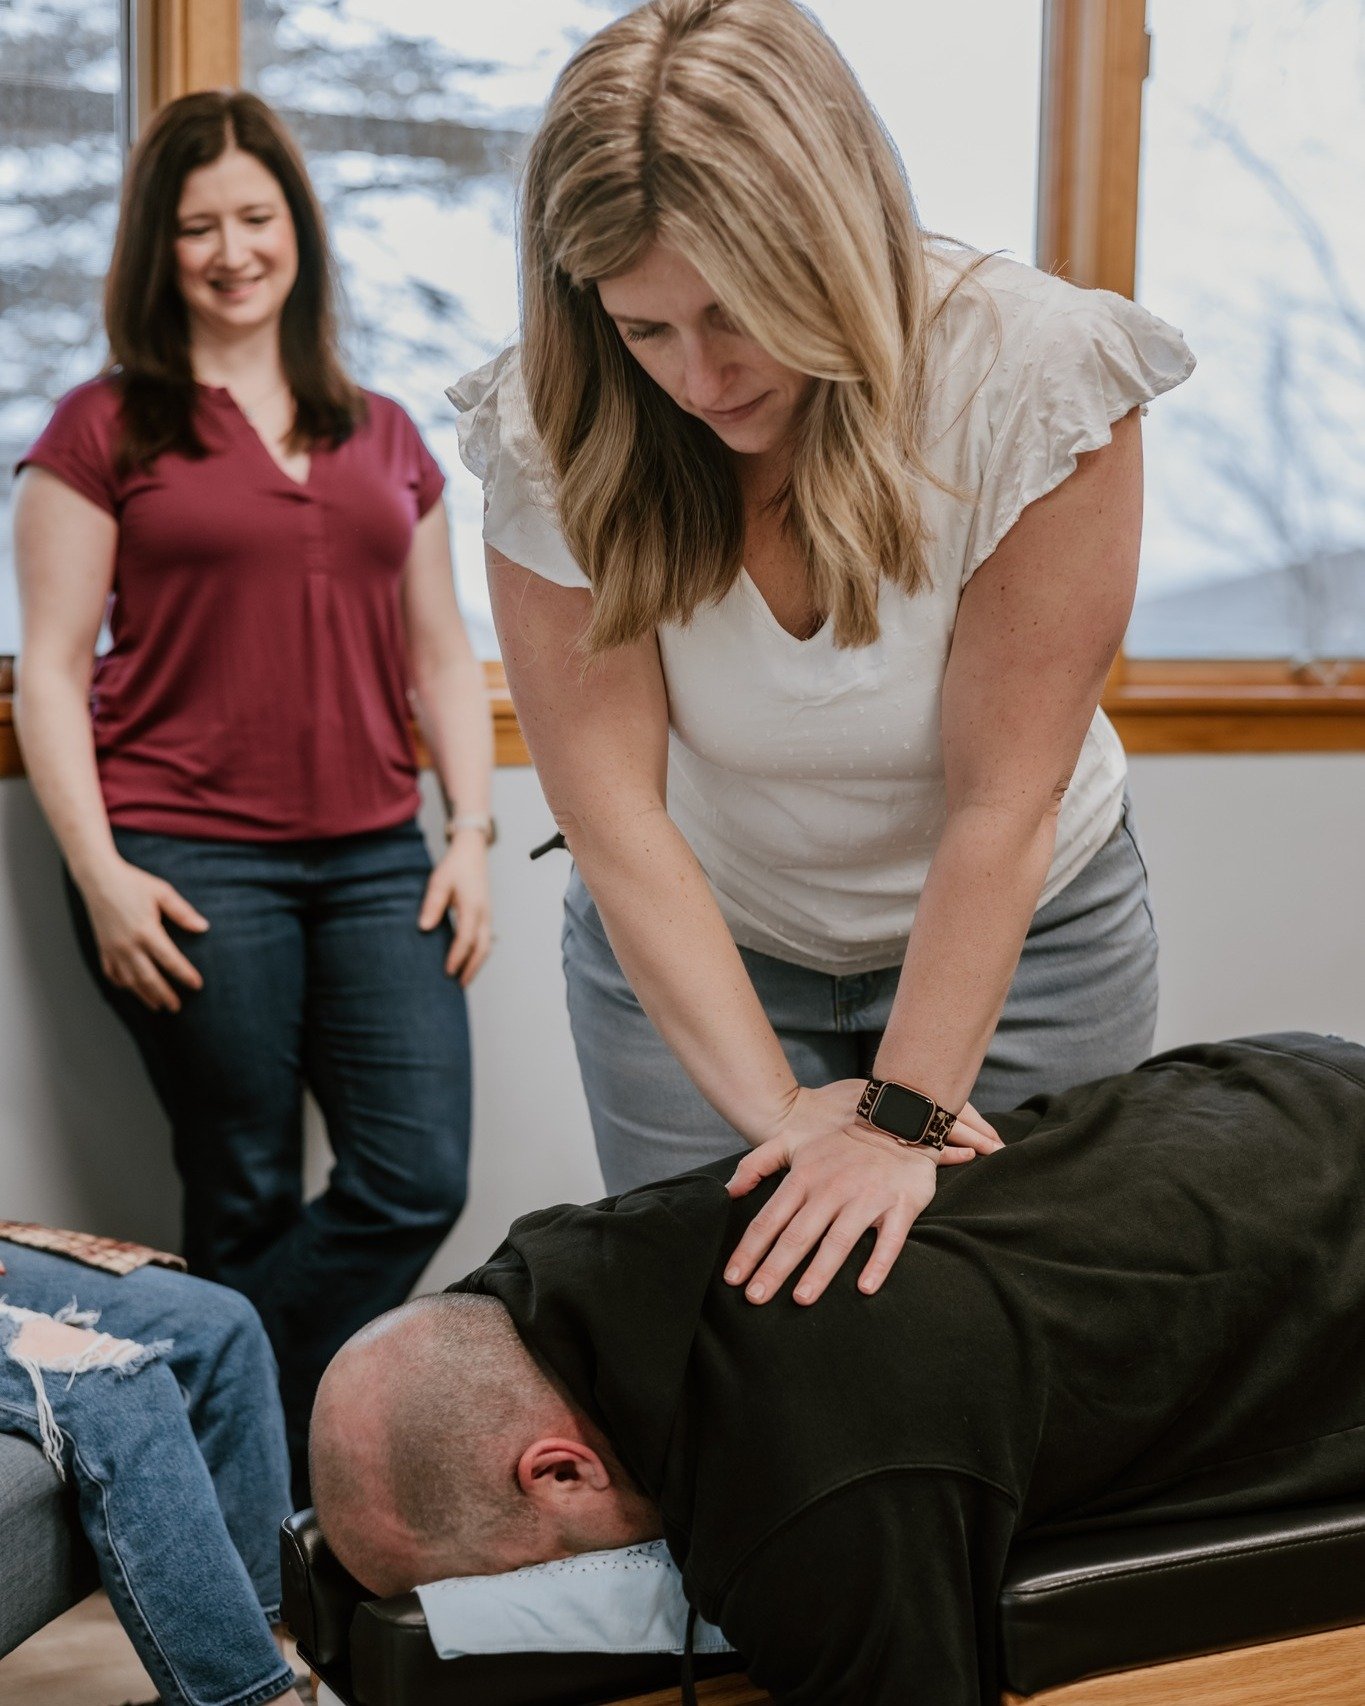 𝑻𝒉𝒆 𝒔𝒆𝒄𝒐𝒏𝒅 &quot;𝑻&quot; 𝒐𝒇 𝒔𝒕𝒓𝒆𝒔𝒔 𝒊𝒔 𝒕𝒓𝒂𝒖𝒎𝒂𝒔!
Physical stress, or traumas, is the stress most commonly associated with chiropractic care, as people generally associate it with &ldquo;throwing their back out.&rdquo; 
Physic